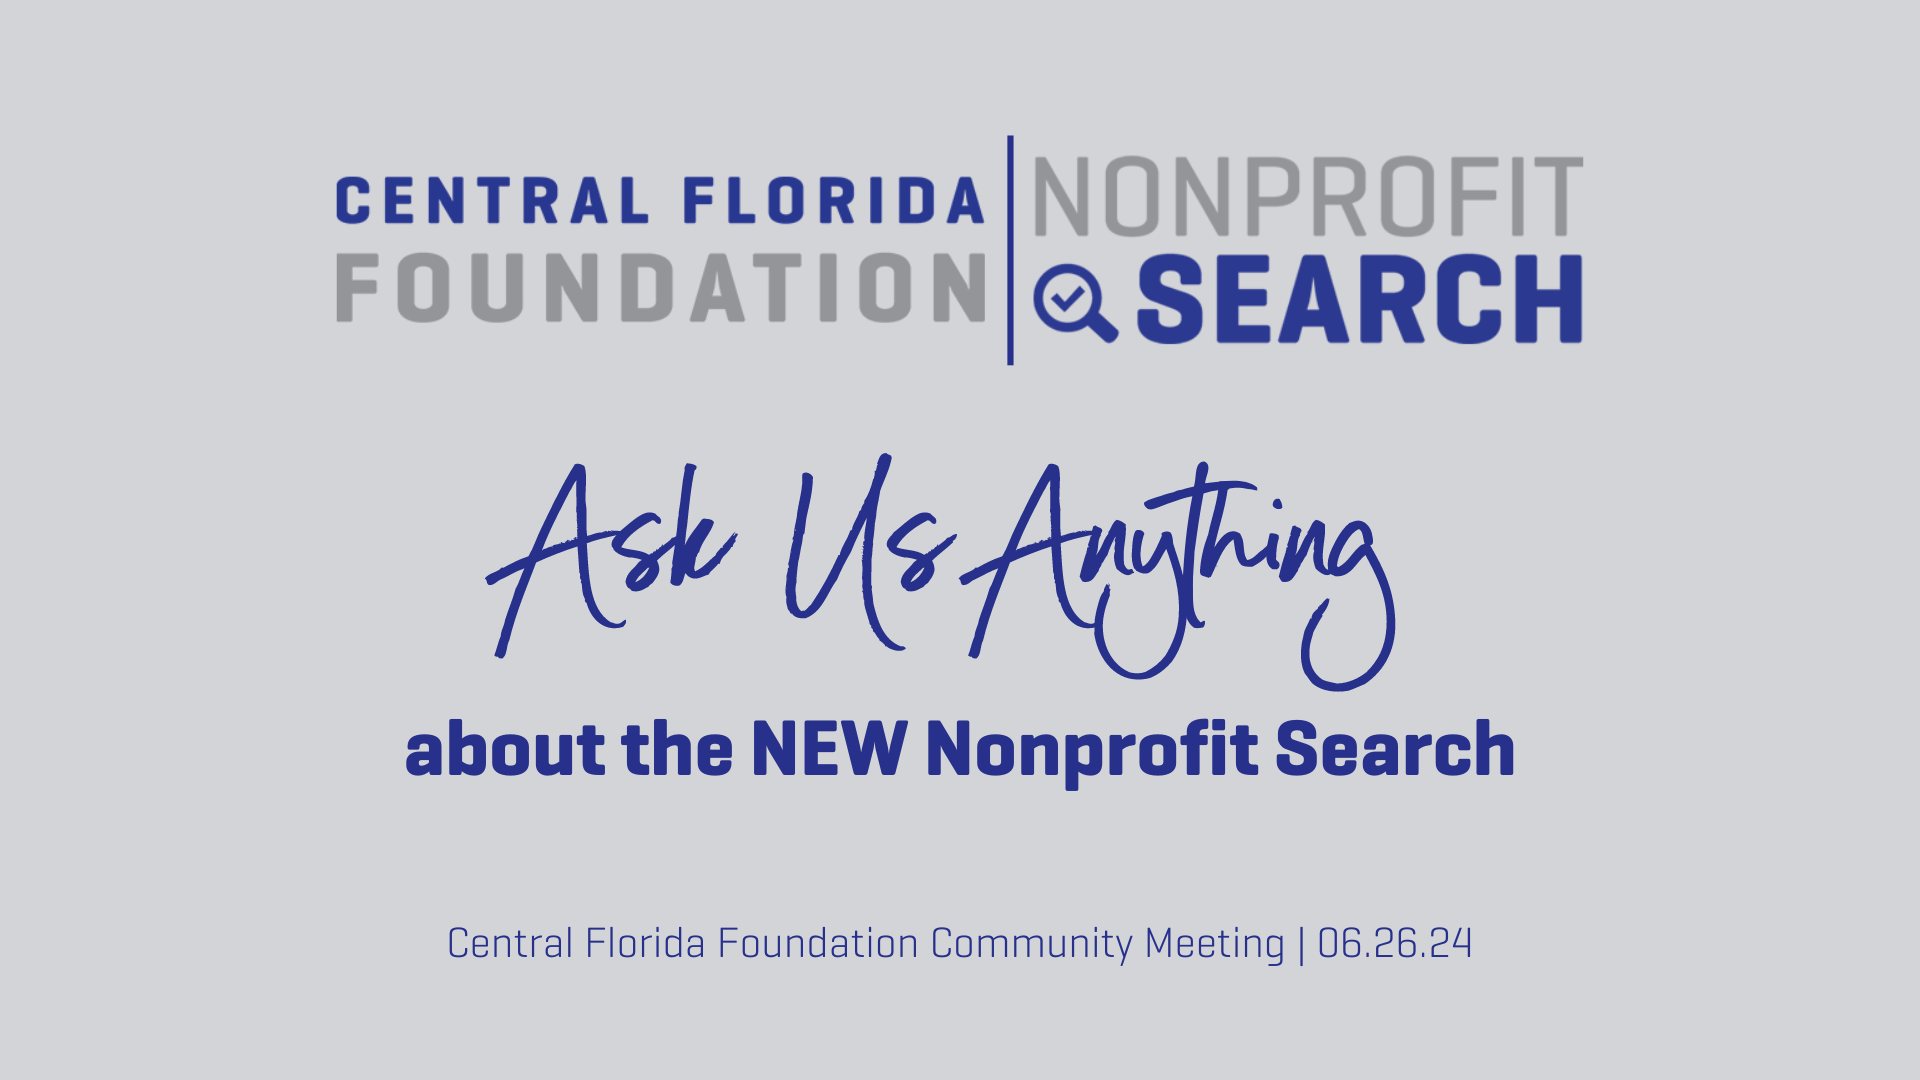 Nonprofit Search is getting a refresh!